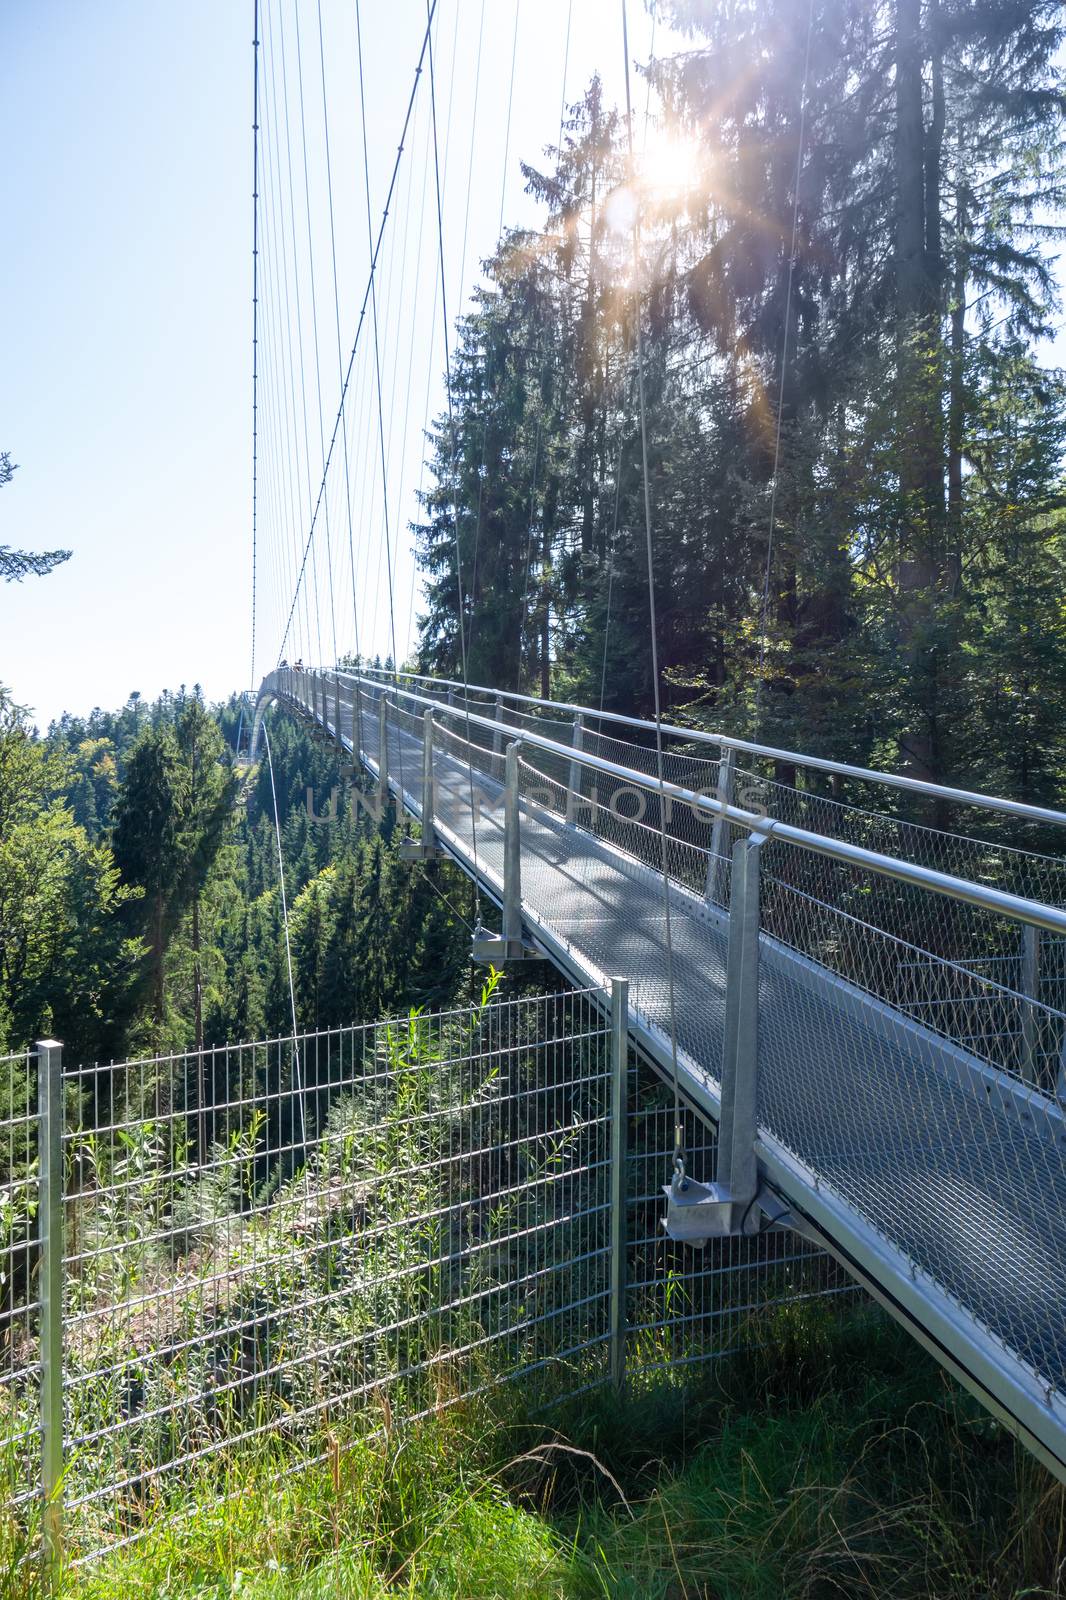 An image of the cable bridge at Bad Wildbad south Germany